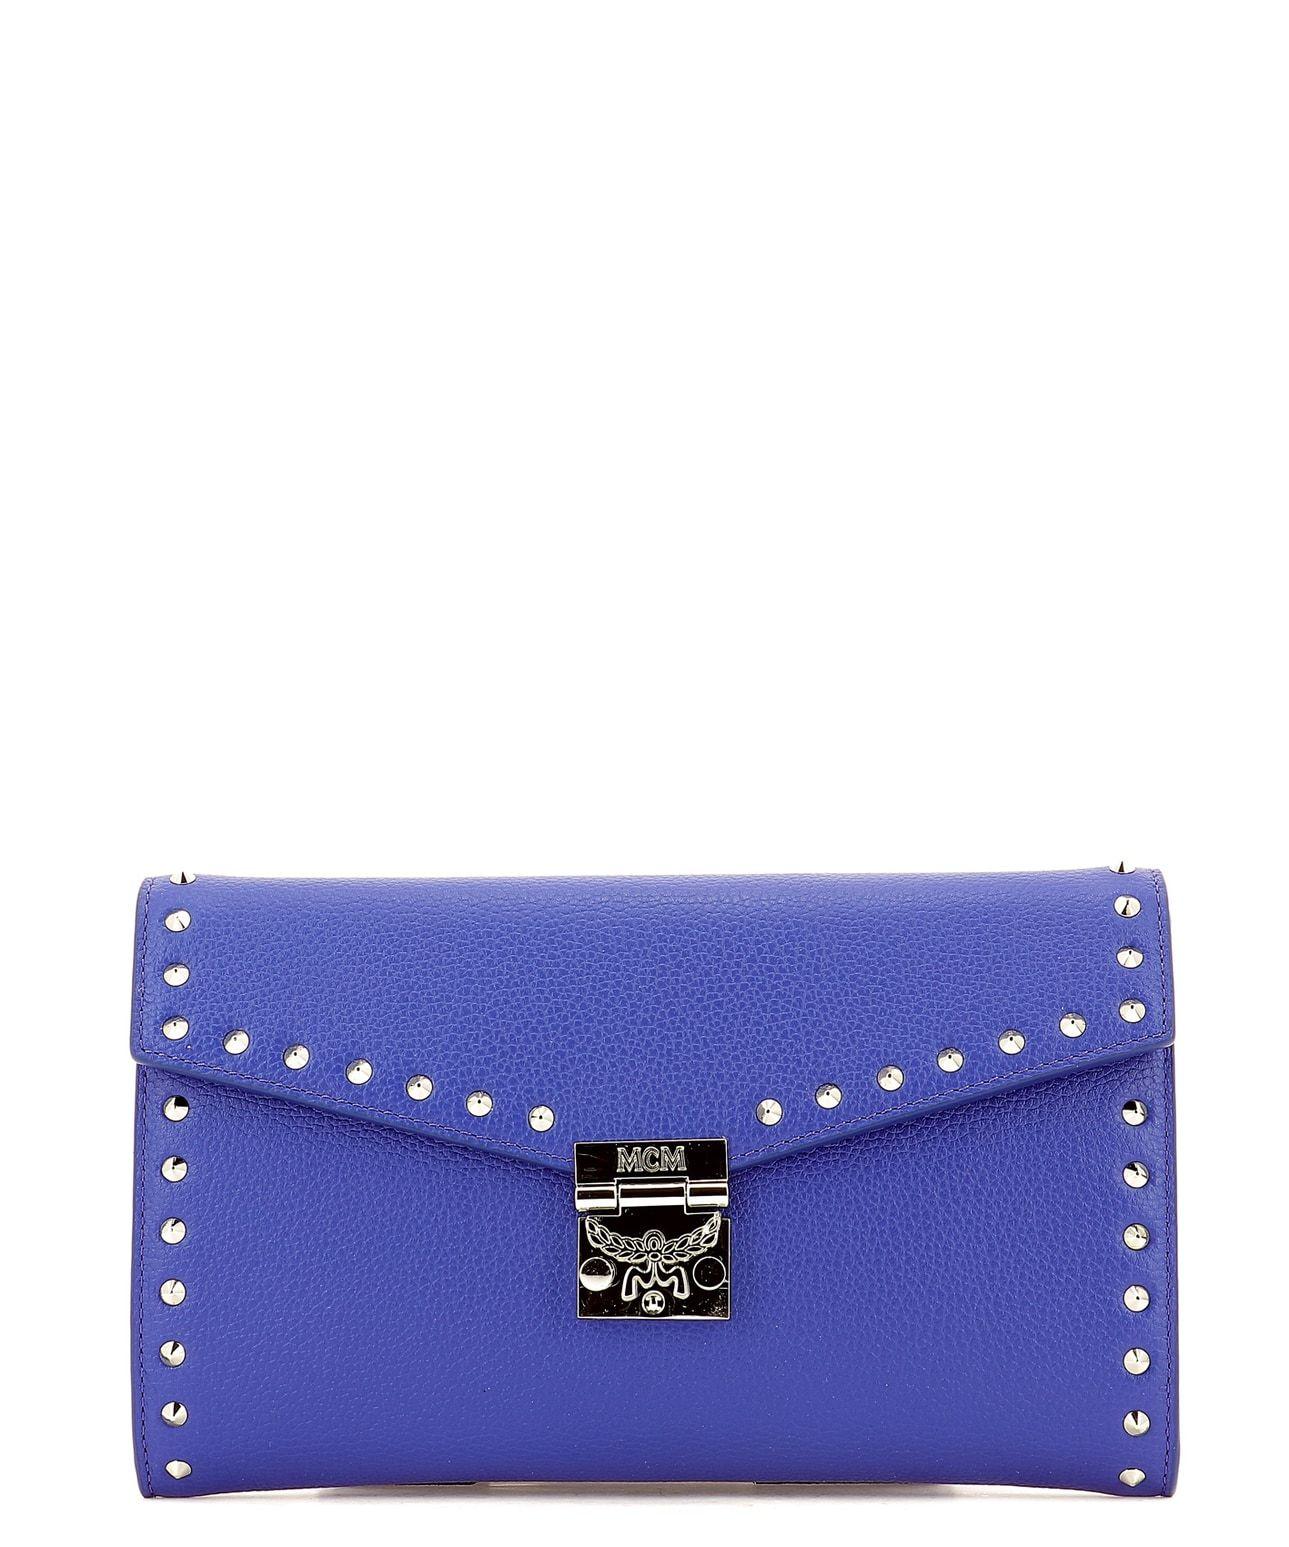 Lyst - MCM Patricia Studded Outline Park Crossbody Bag in Blue